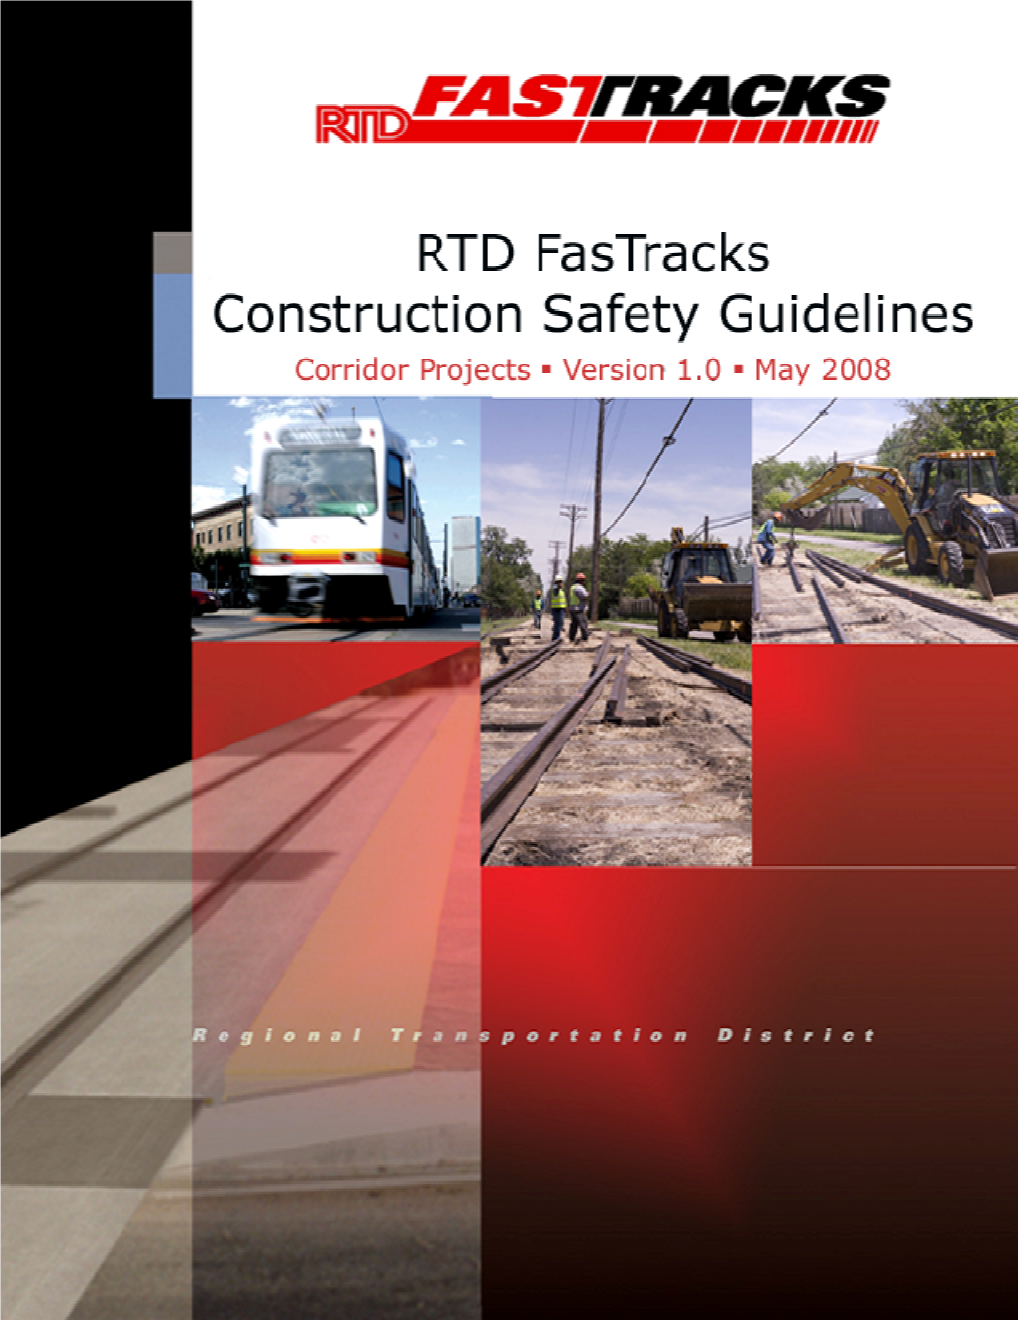 RTD Construction Safety Guideline